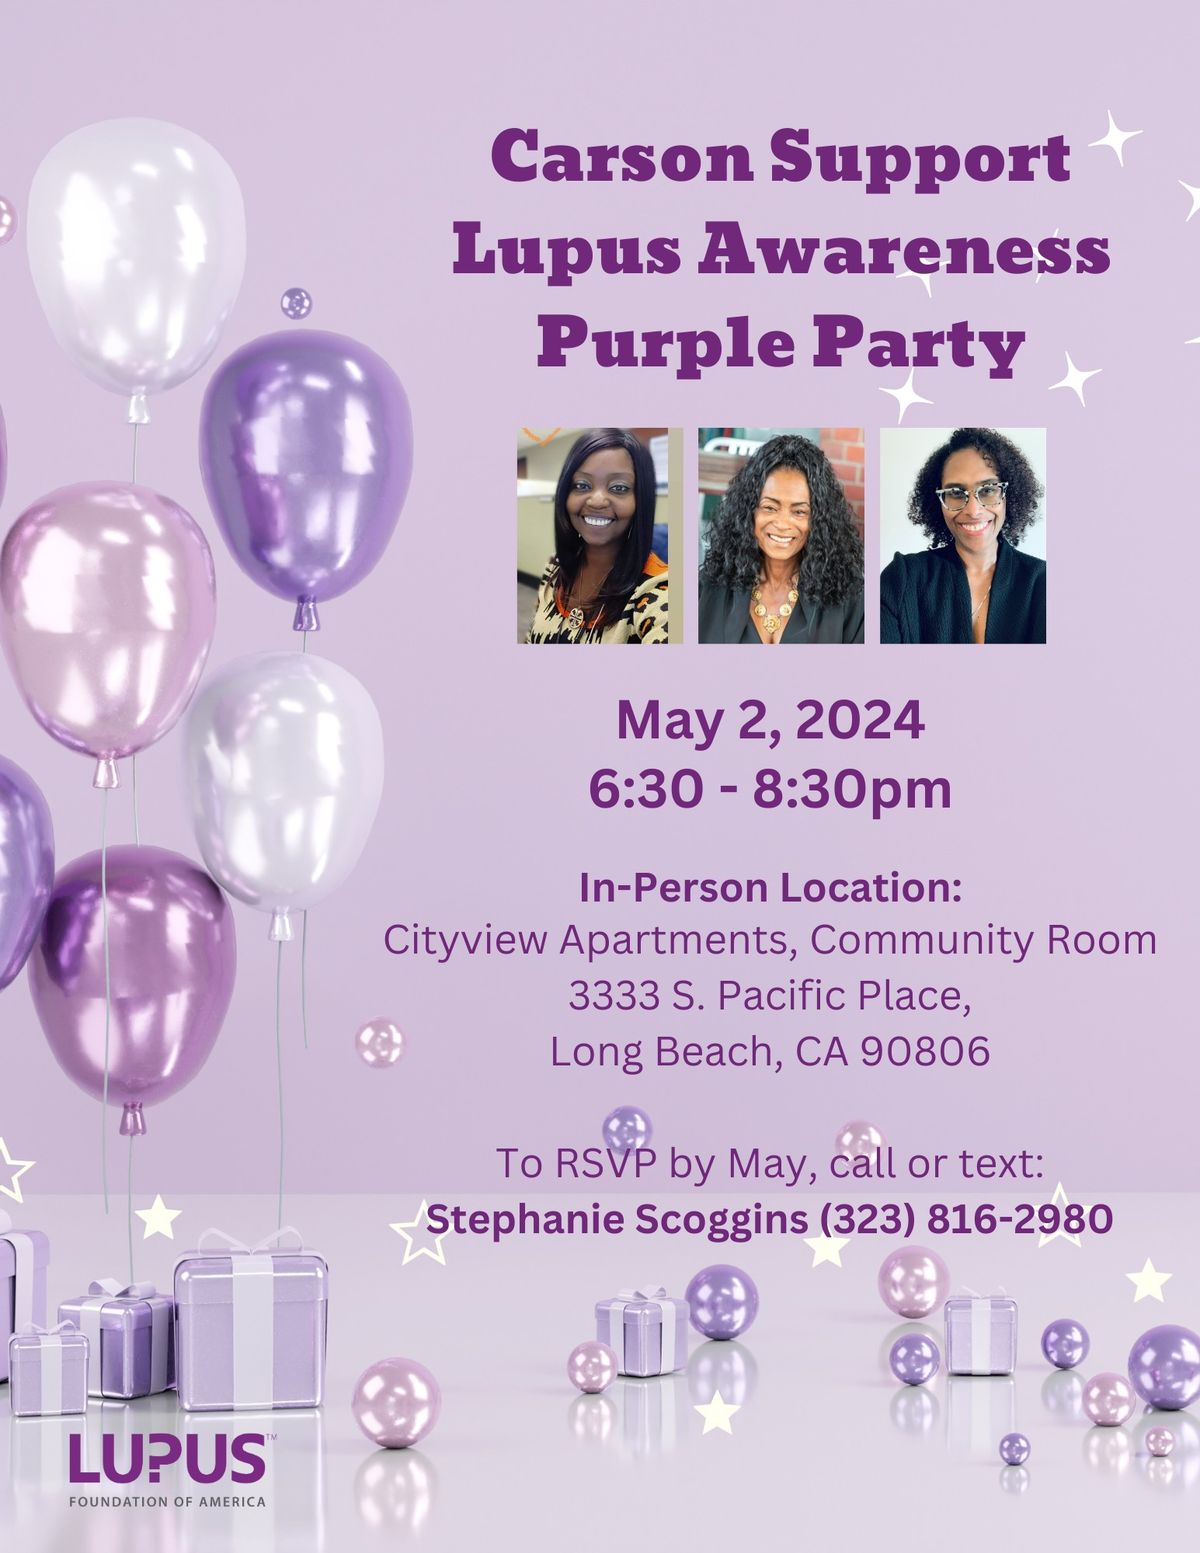 Carson Support Lupus Awareness Purple Party